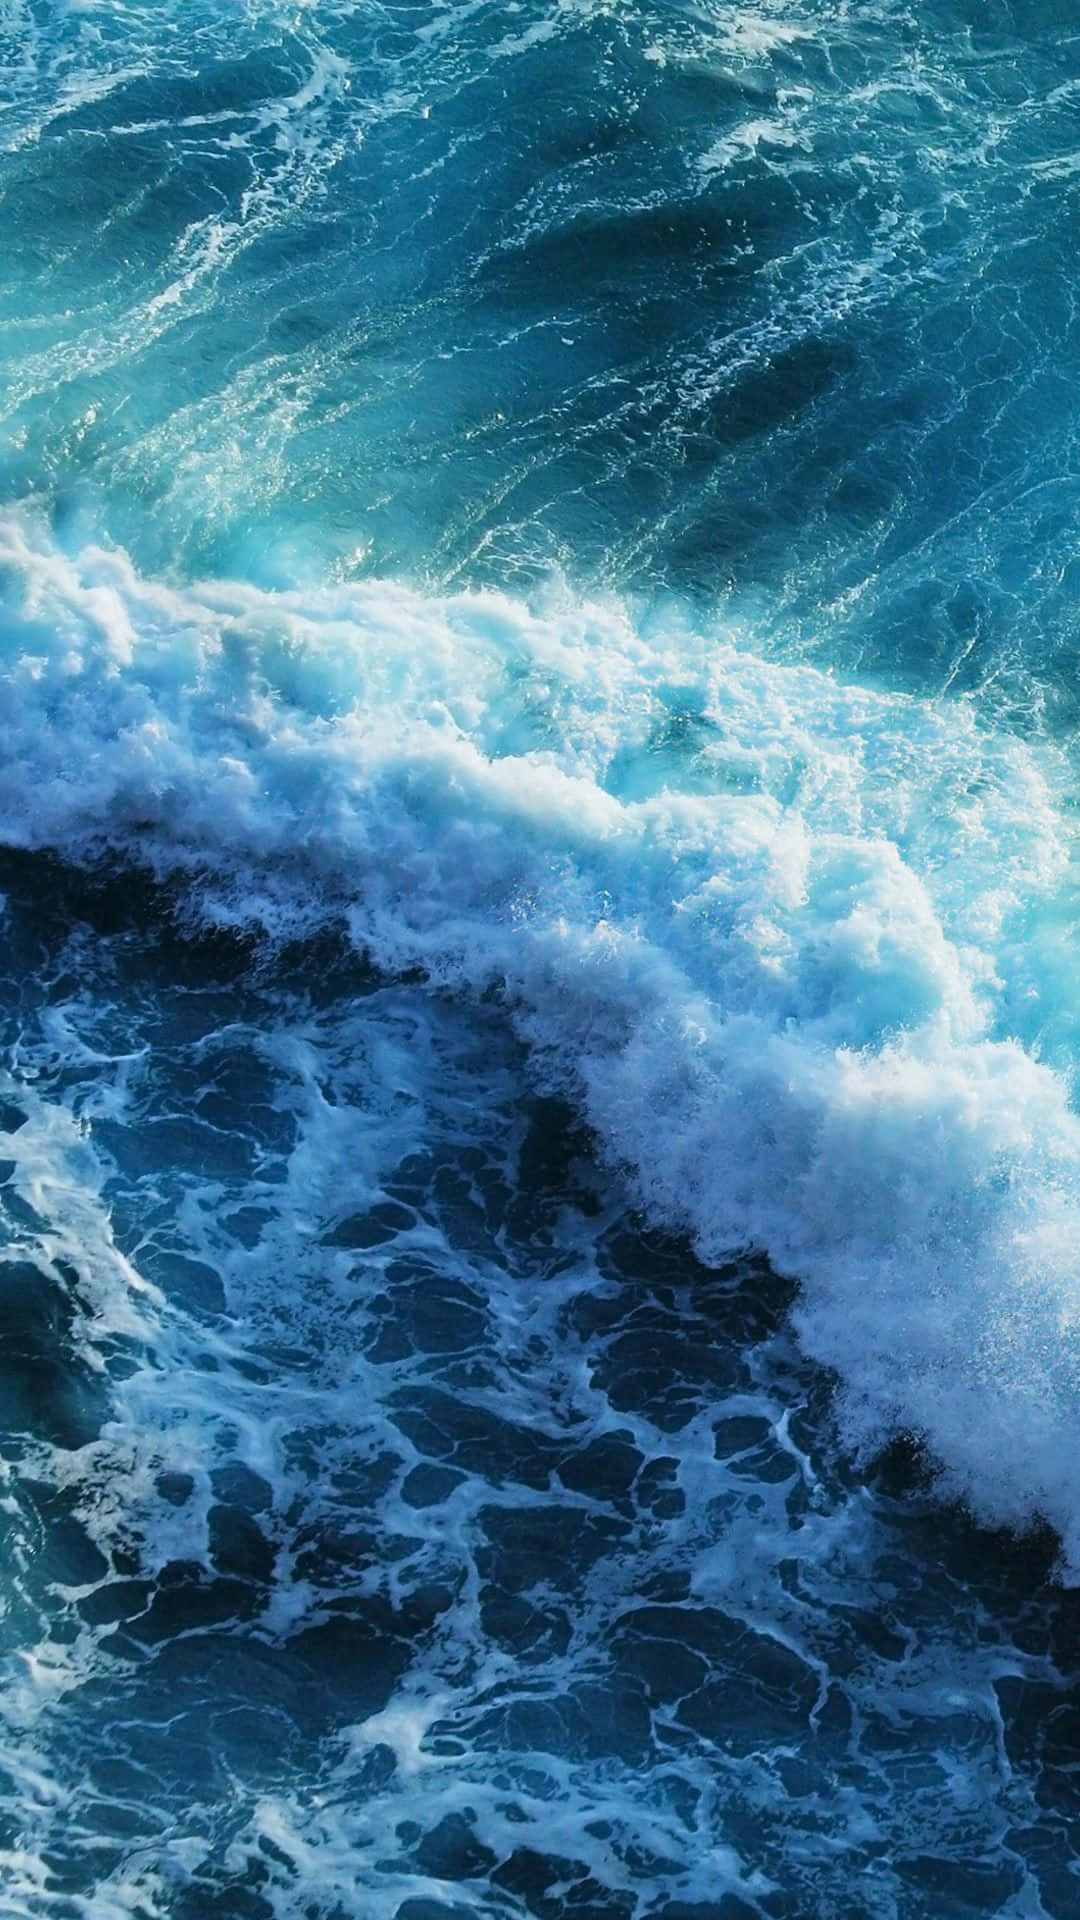 A Blue Ocean With Waves Crashing Over It Wallpaper